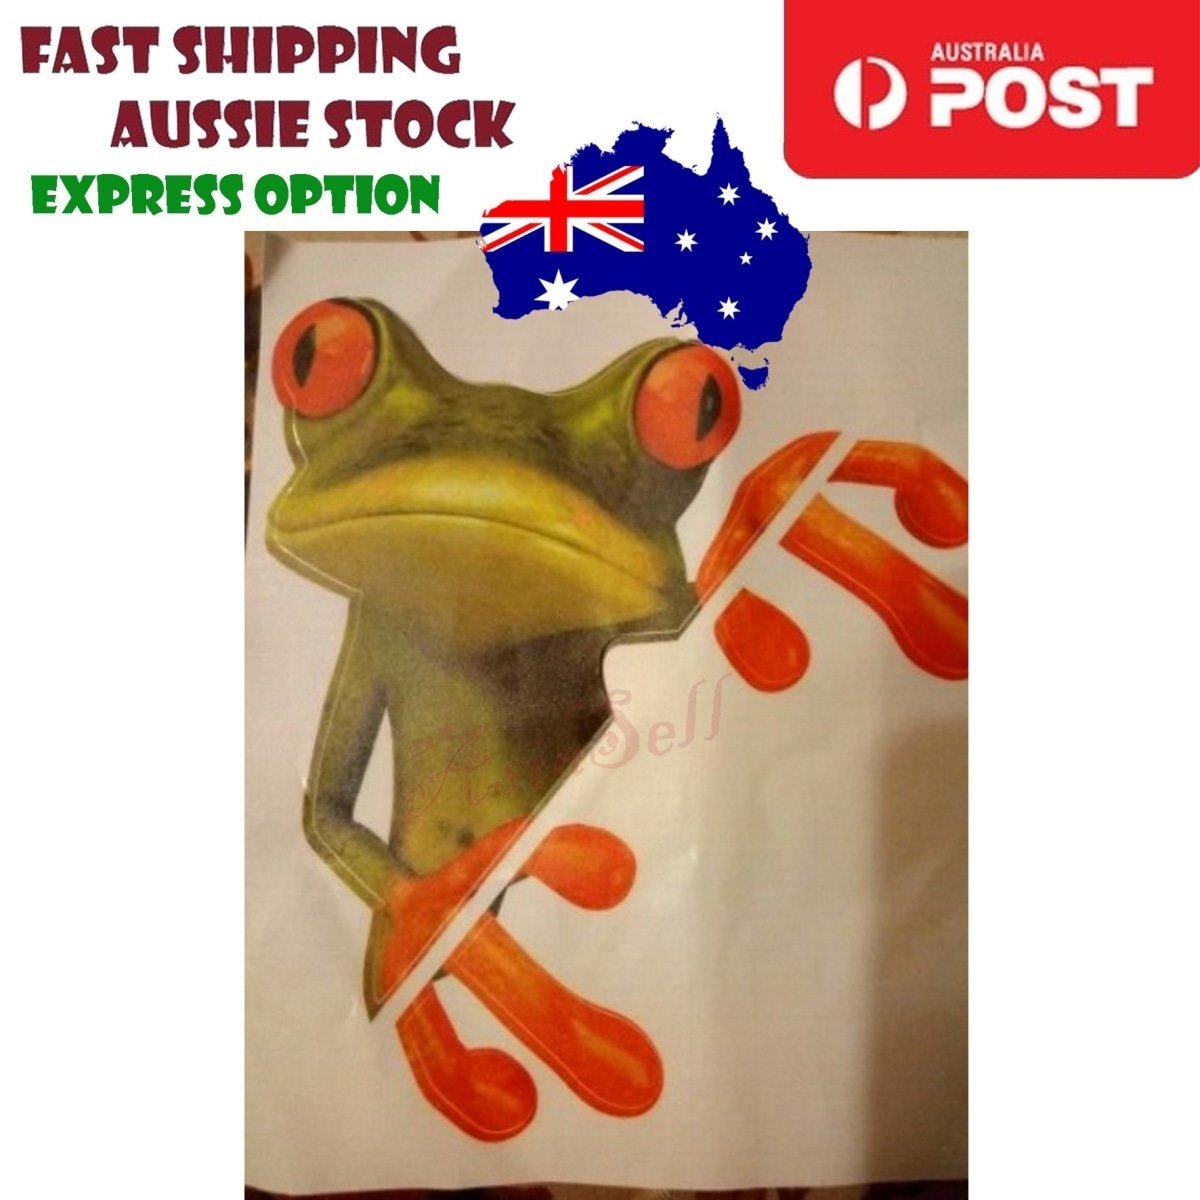 2x Frog Stickers 14-15cm Window Bathroom Toilet Seat Animal Decal Wall Tiles Car - D - - Asia Sell